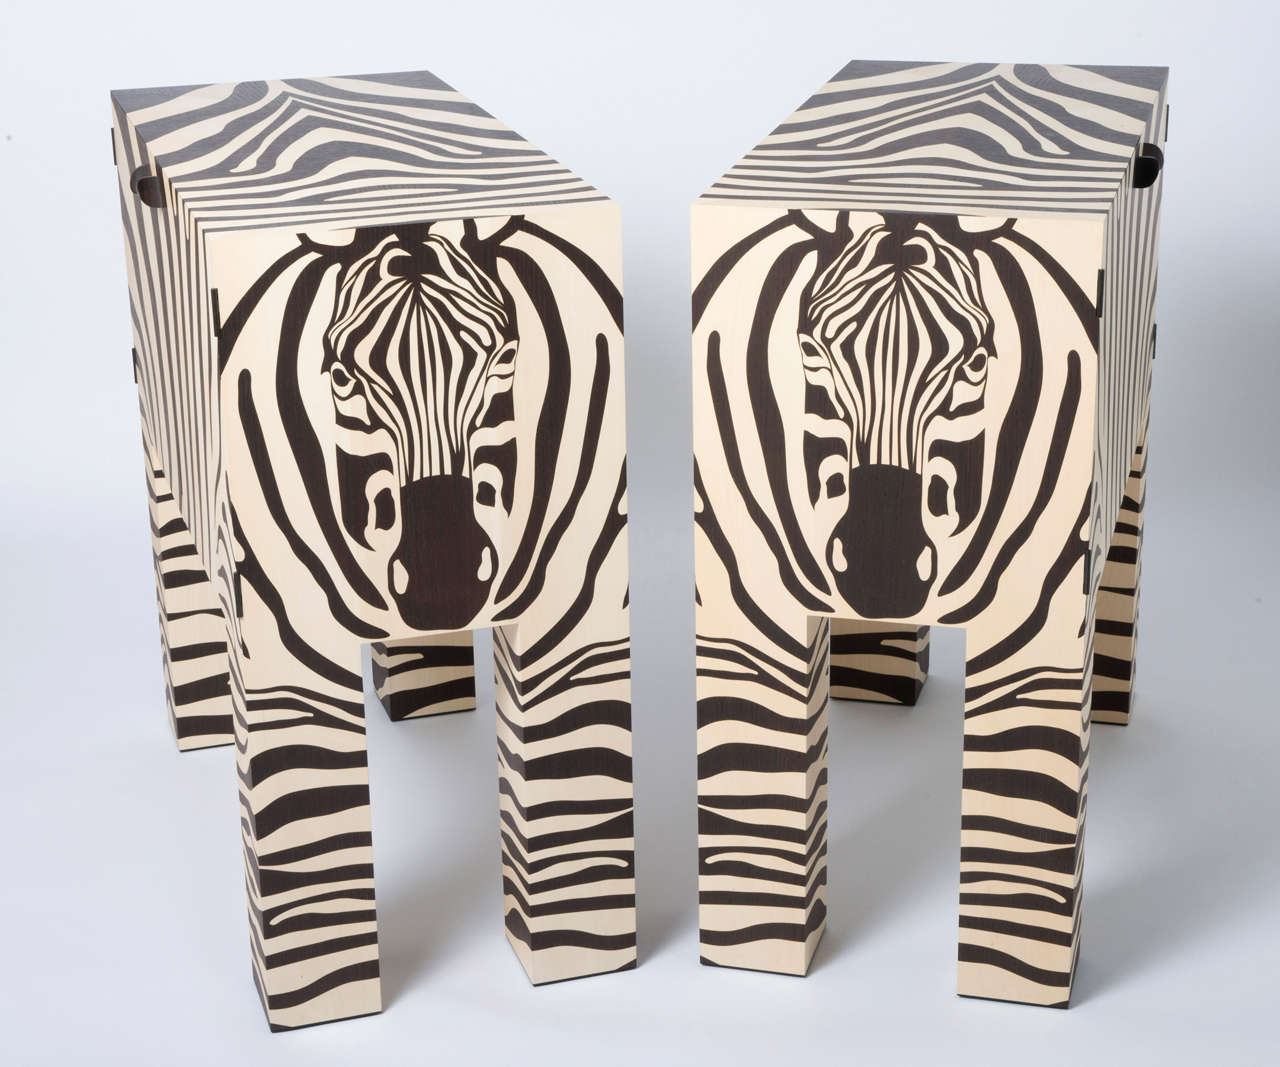 Contemporary John Makepeace pair of marquetry “Zebra” cabinets, England 2010